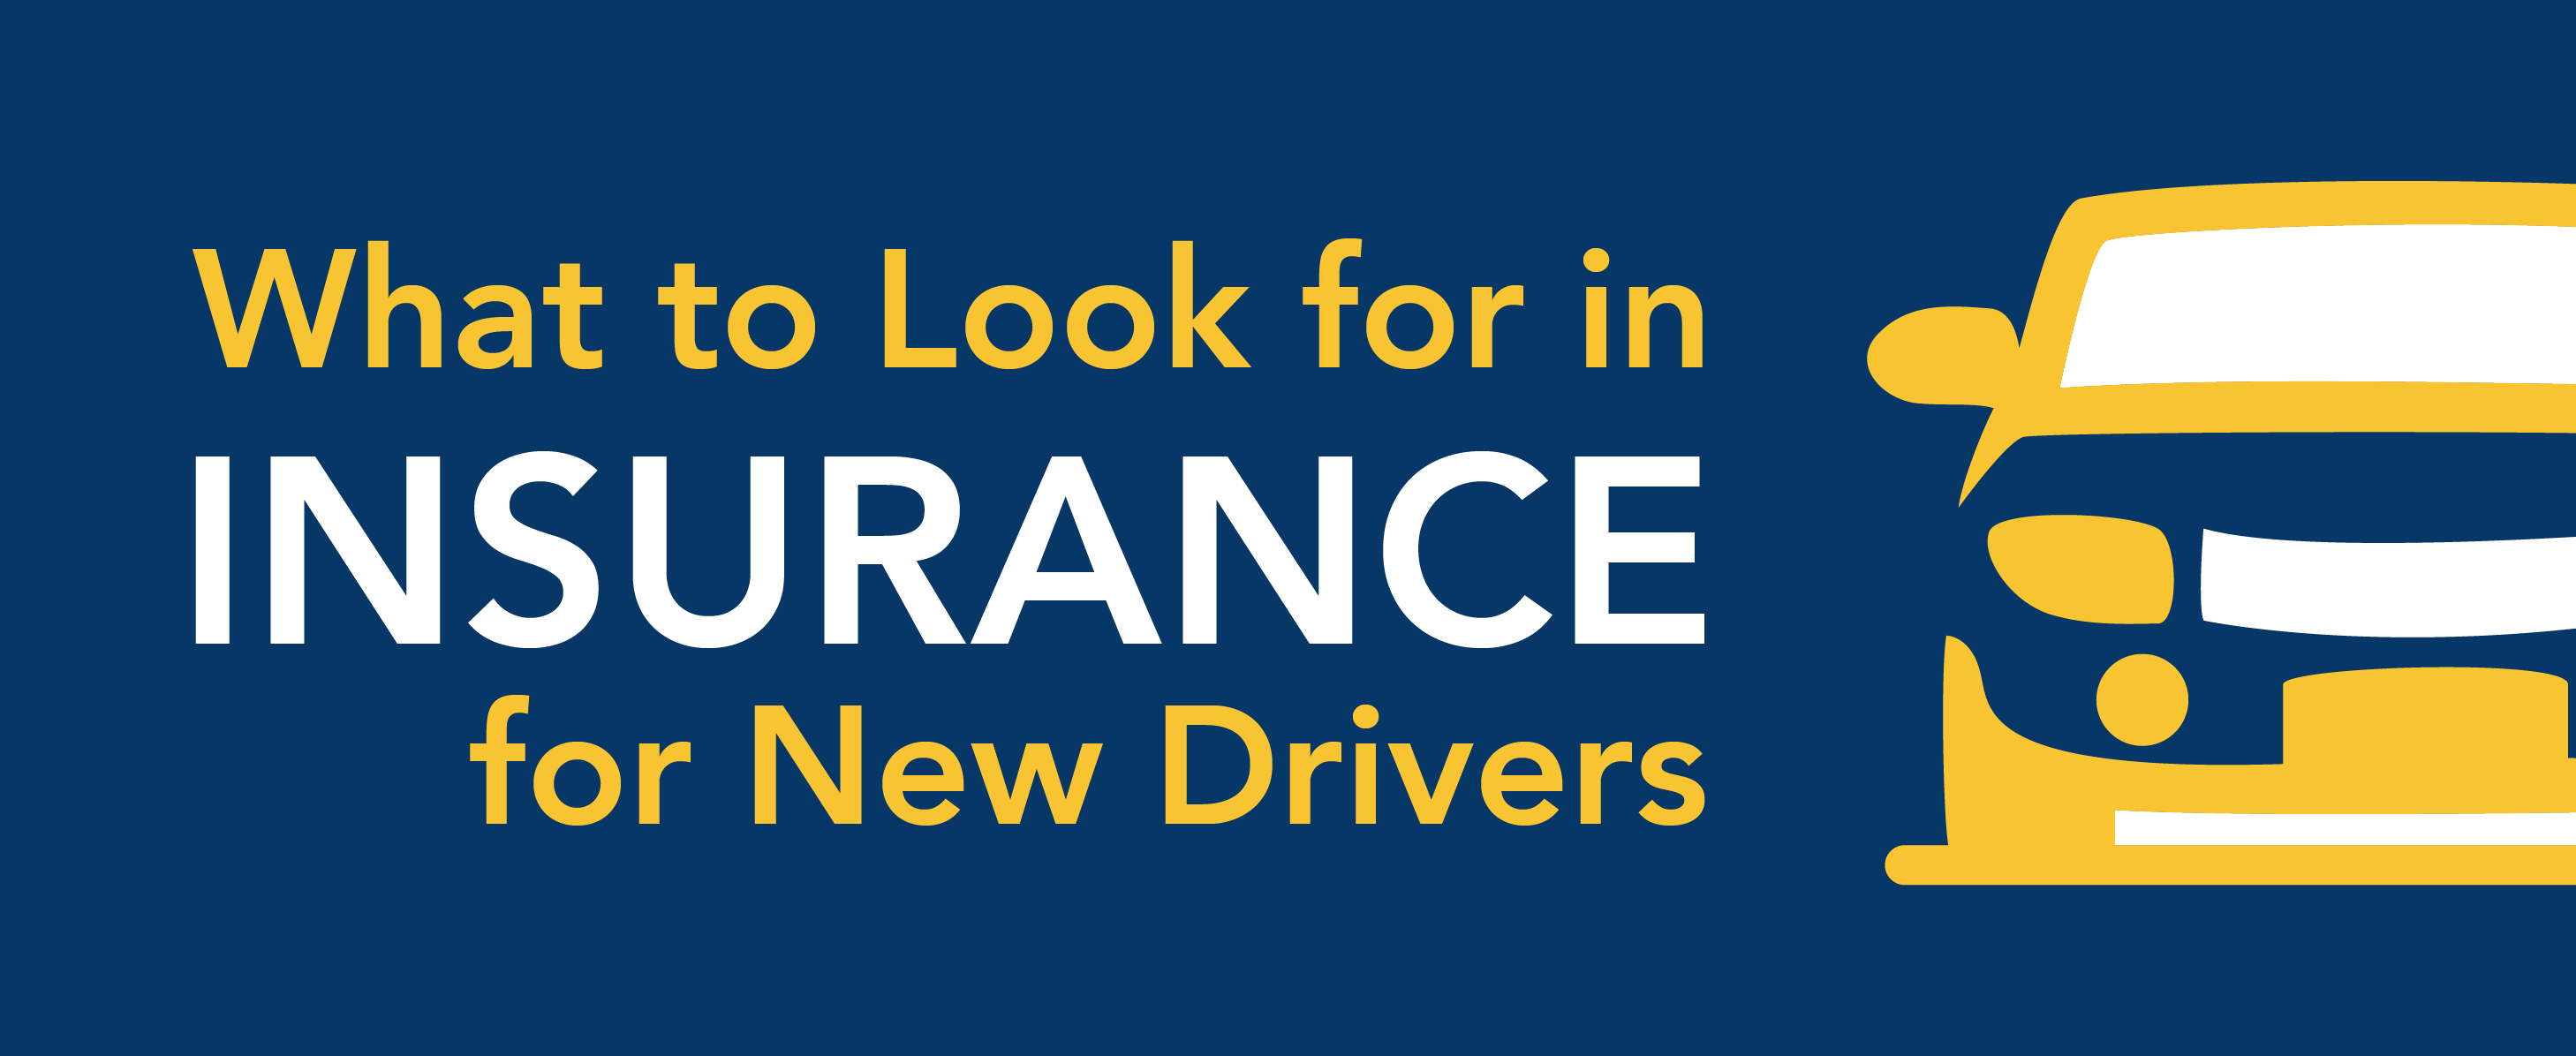 What to look for in insurance for new drivers.